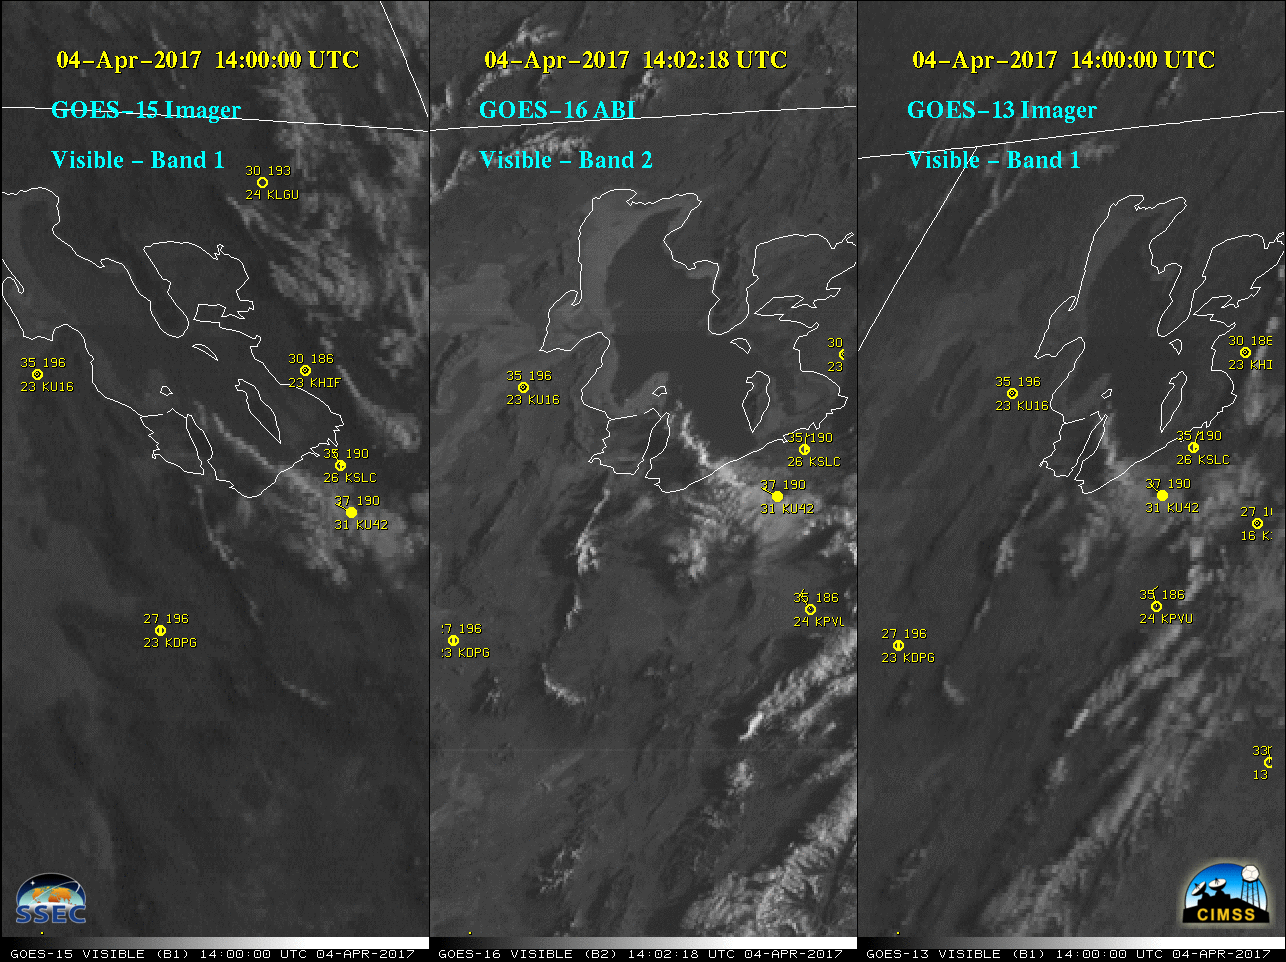 Visible images from GOES-15 (0.63 µm, left), GOES-16 (0.64 µm, center) and GOES-13 (0.63 µm, right), with hourly surface reports plotted in yellow [click to play animation]